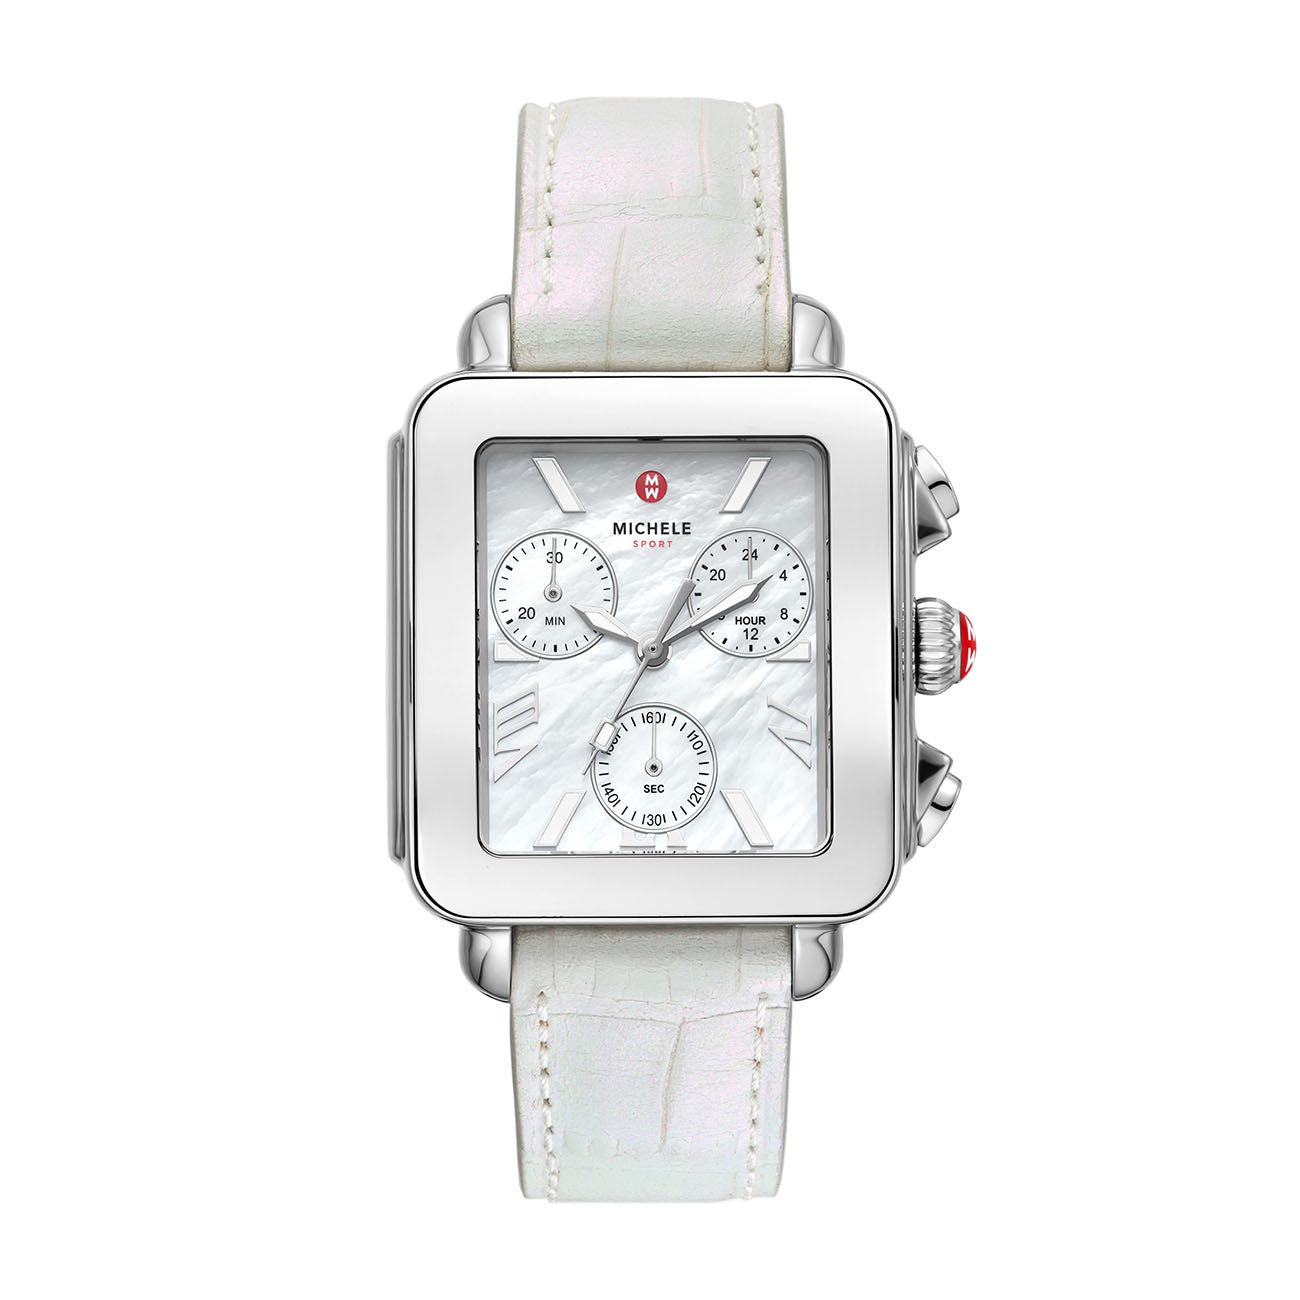 MICHELE Deco Sport Chrono Watch In White Mother-Of-Pearl | Michele | Luby 